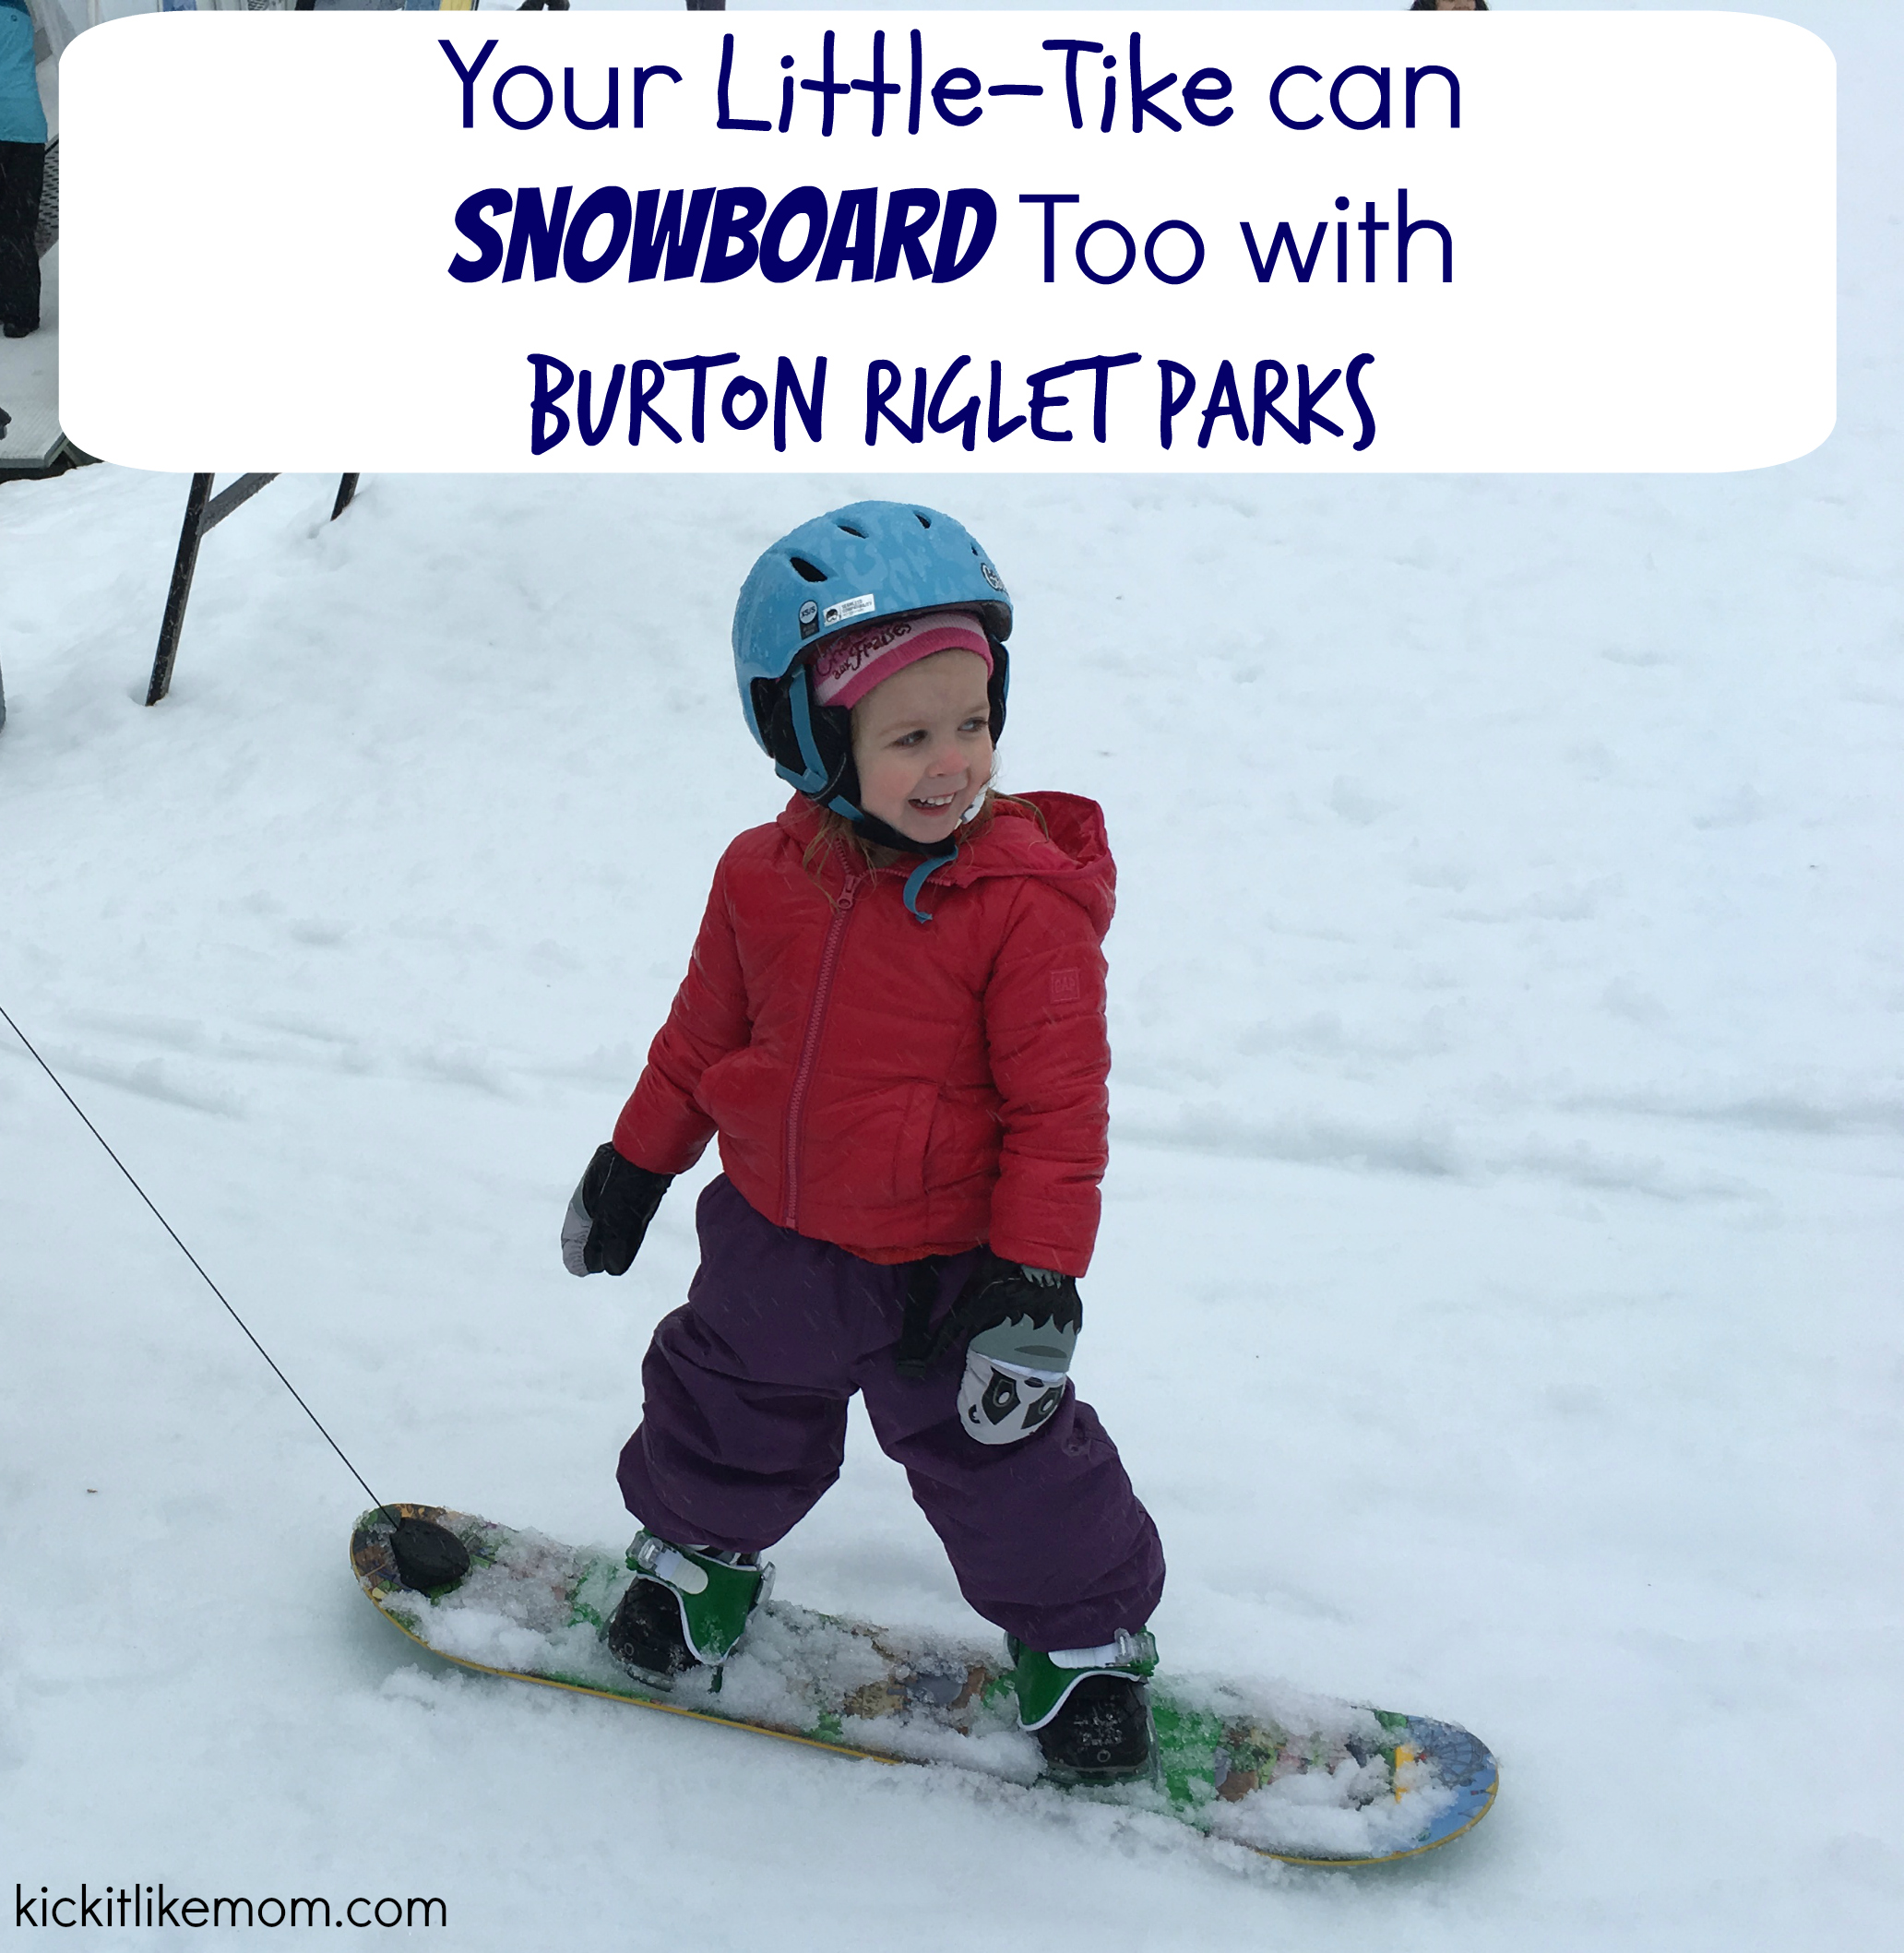 Your Little-Tike Can Snowboard Too with Burton Riglet Parks